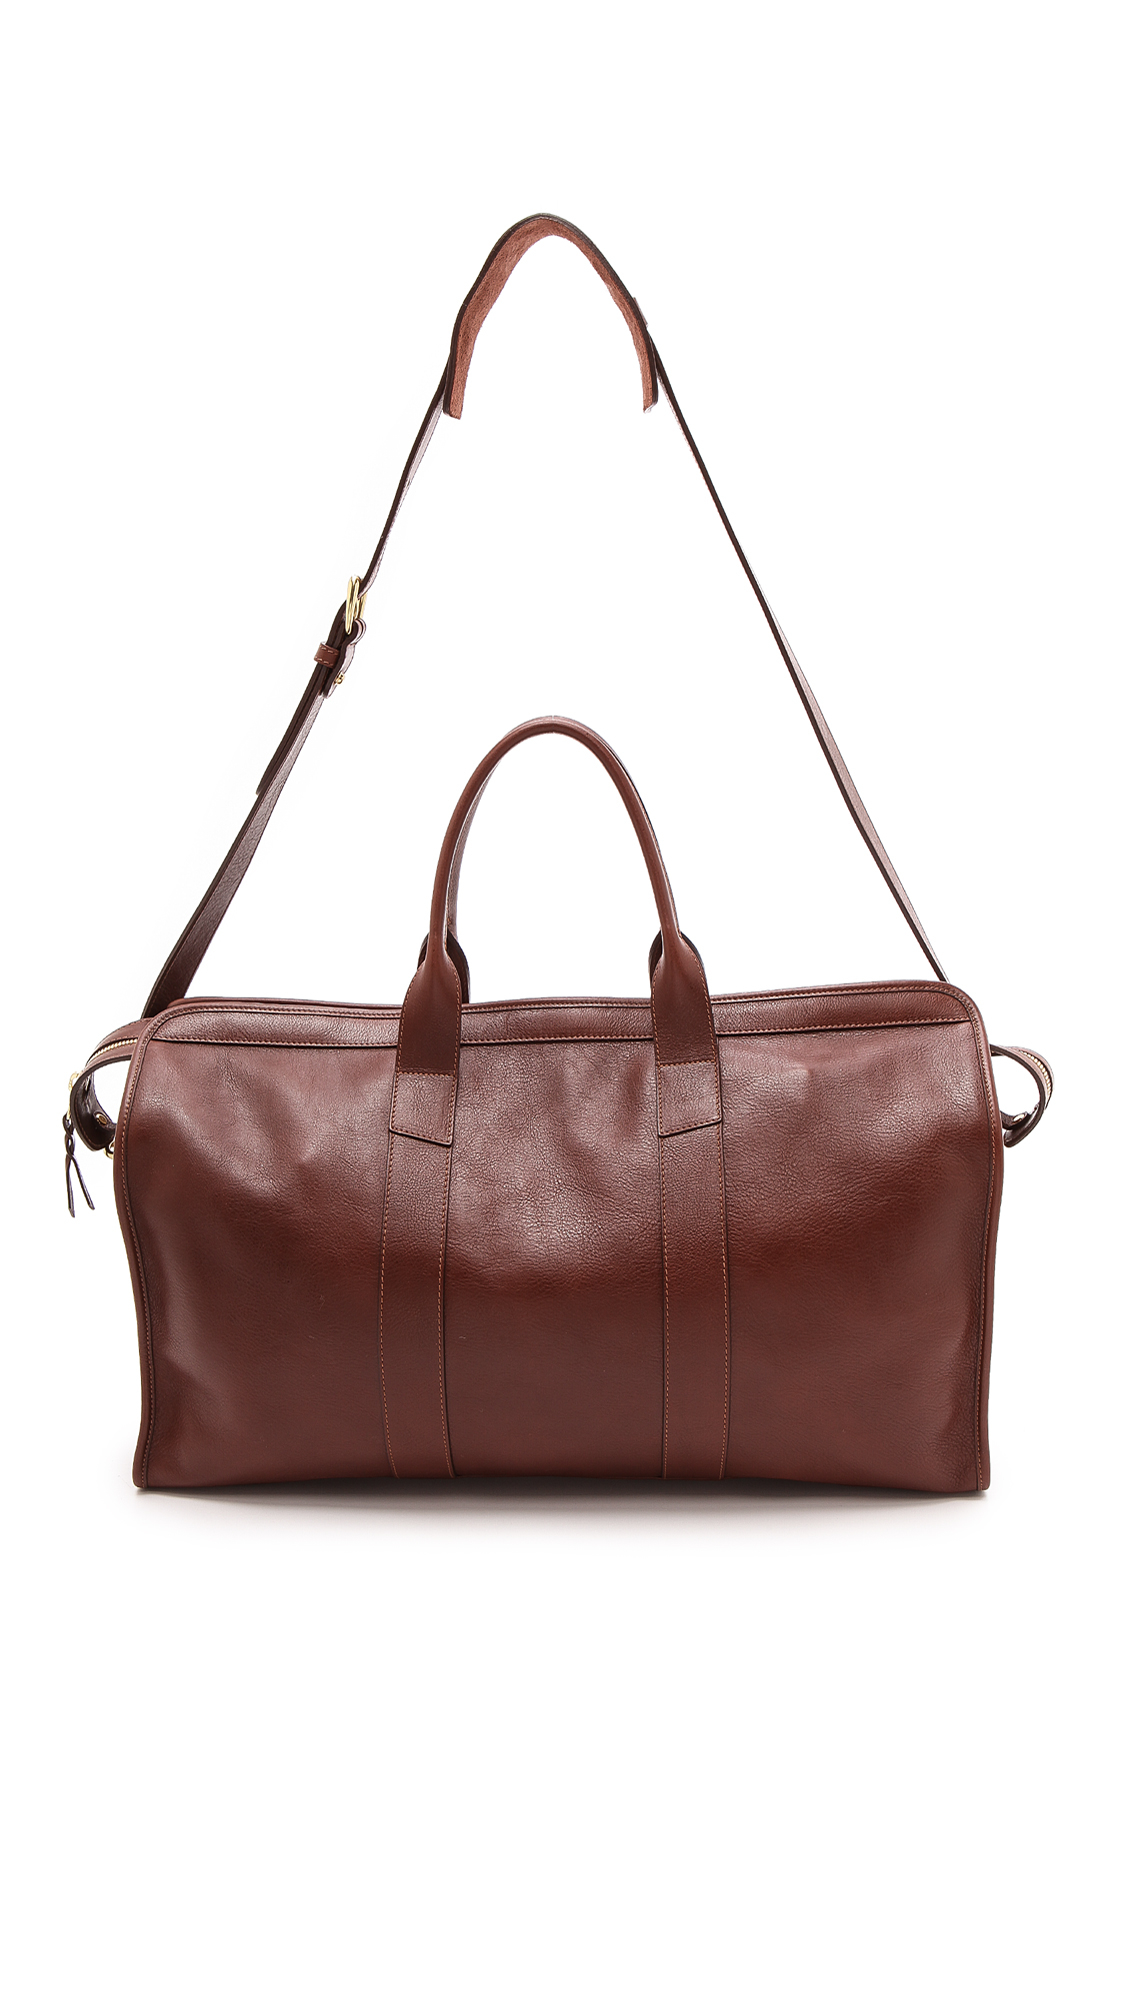 Lyst - Lotuff Leather Duffel Travel Bag in Brown for Men